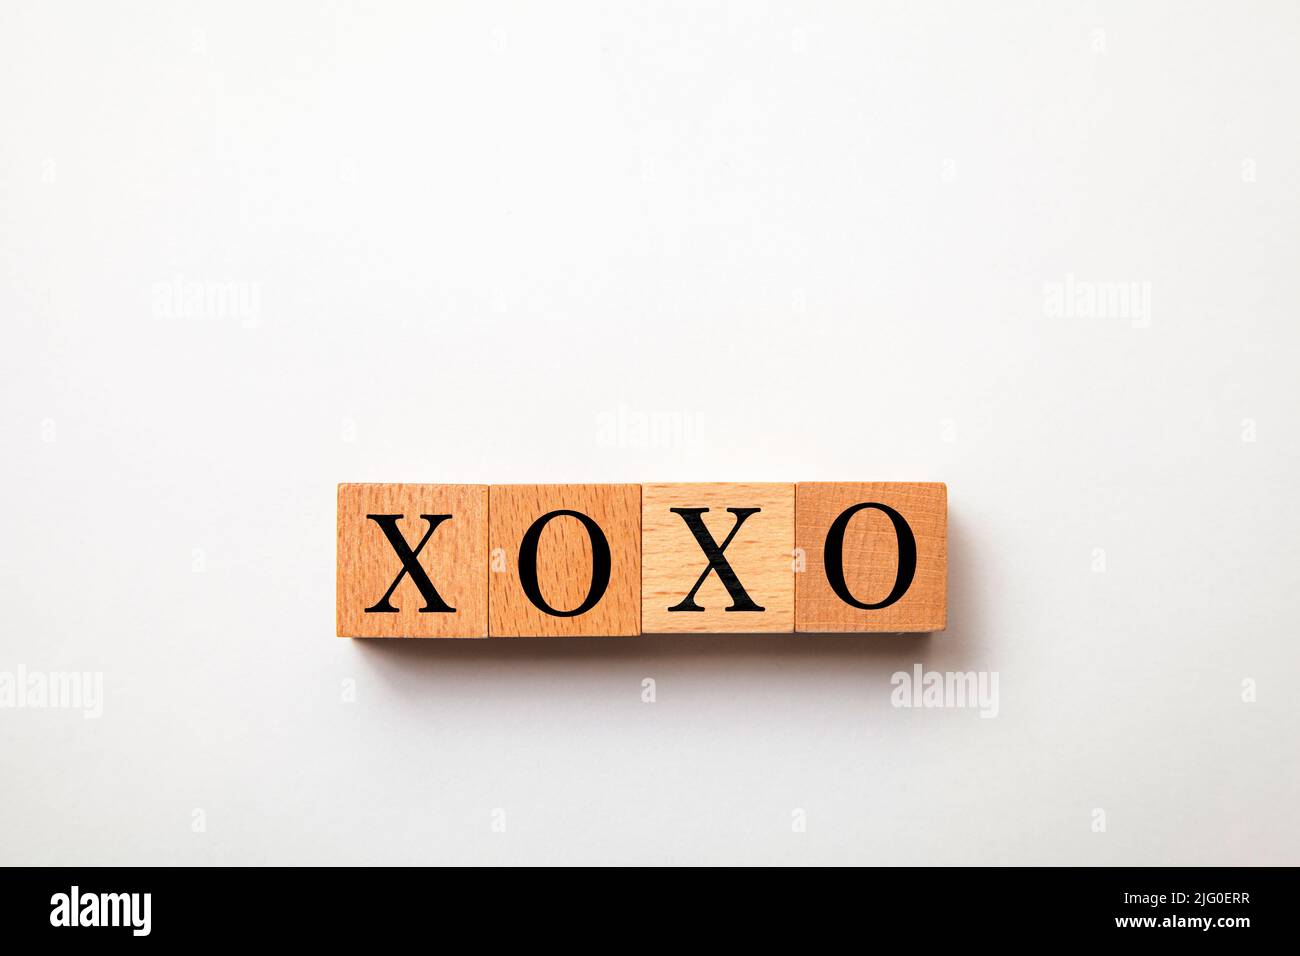 The character of xoxo. Hugs and kisses. Affection expression. Written on four wooden blocks. Black letters. White background. Stock Photo